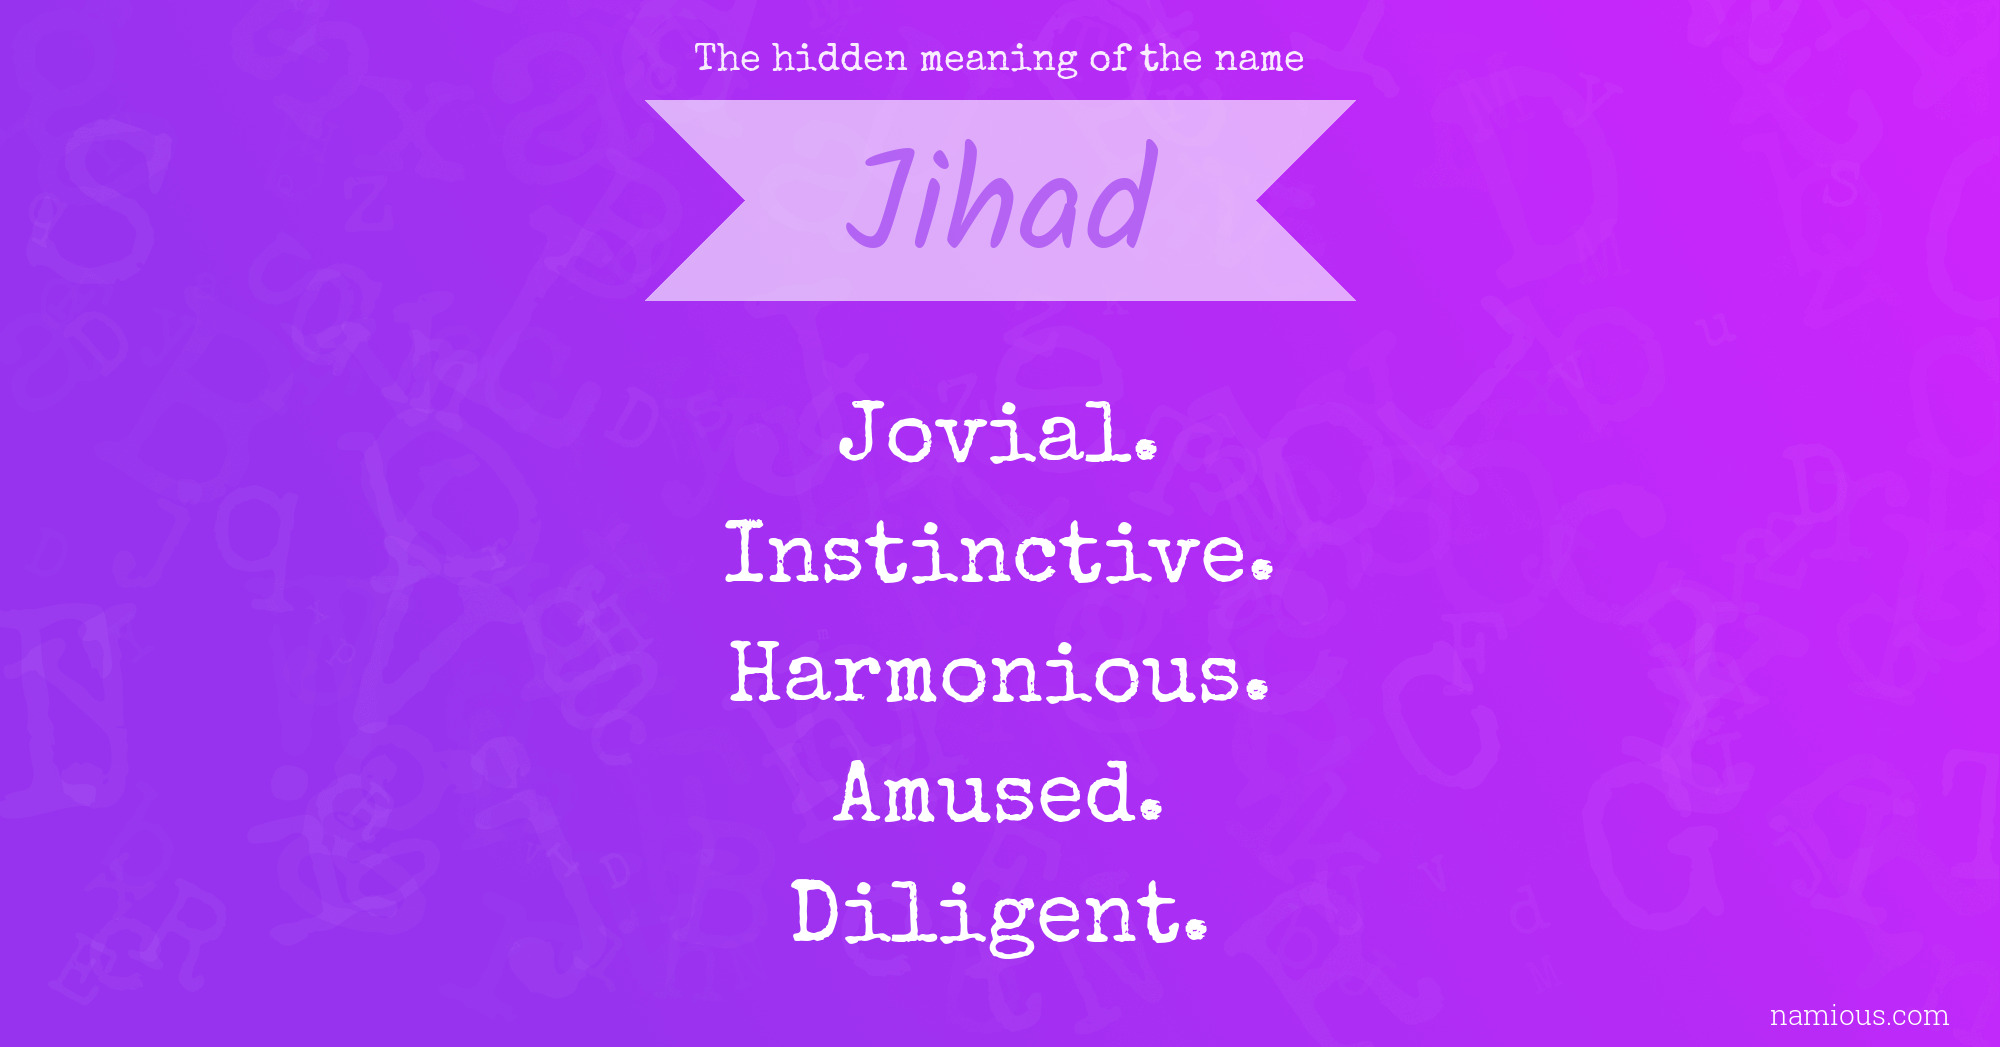 The hidden meaning of the name Jihad